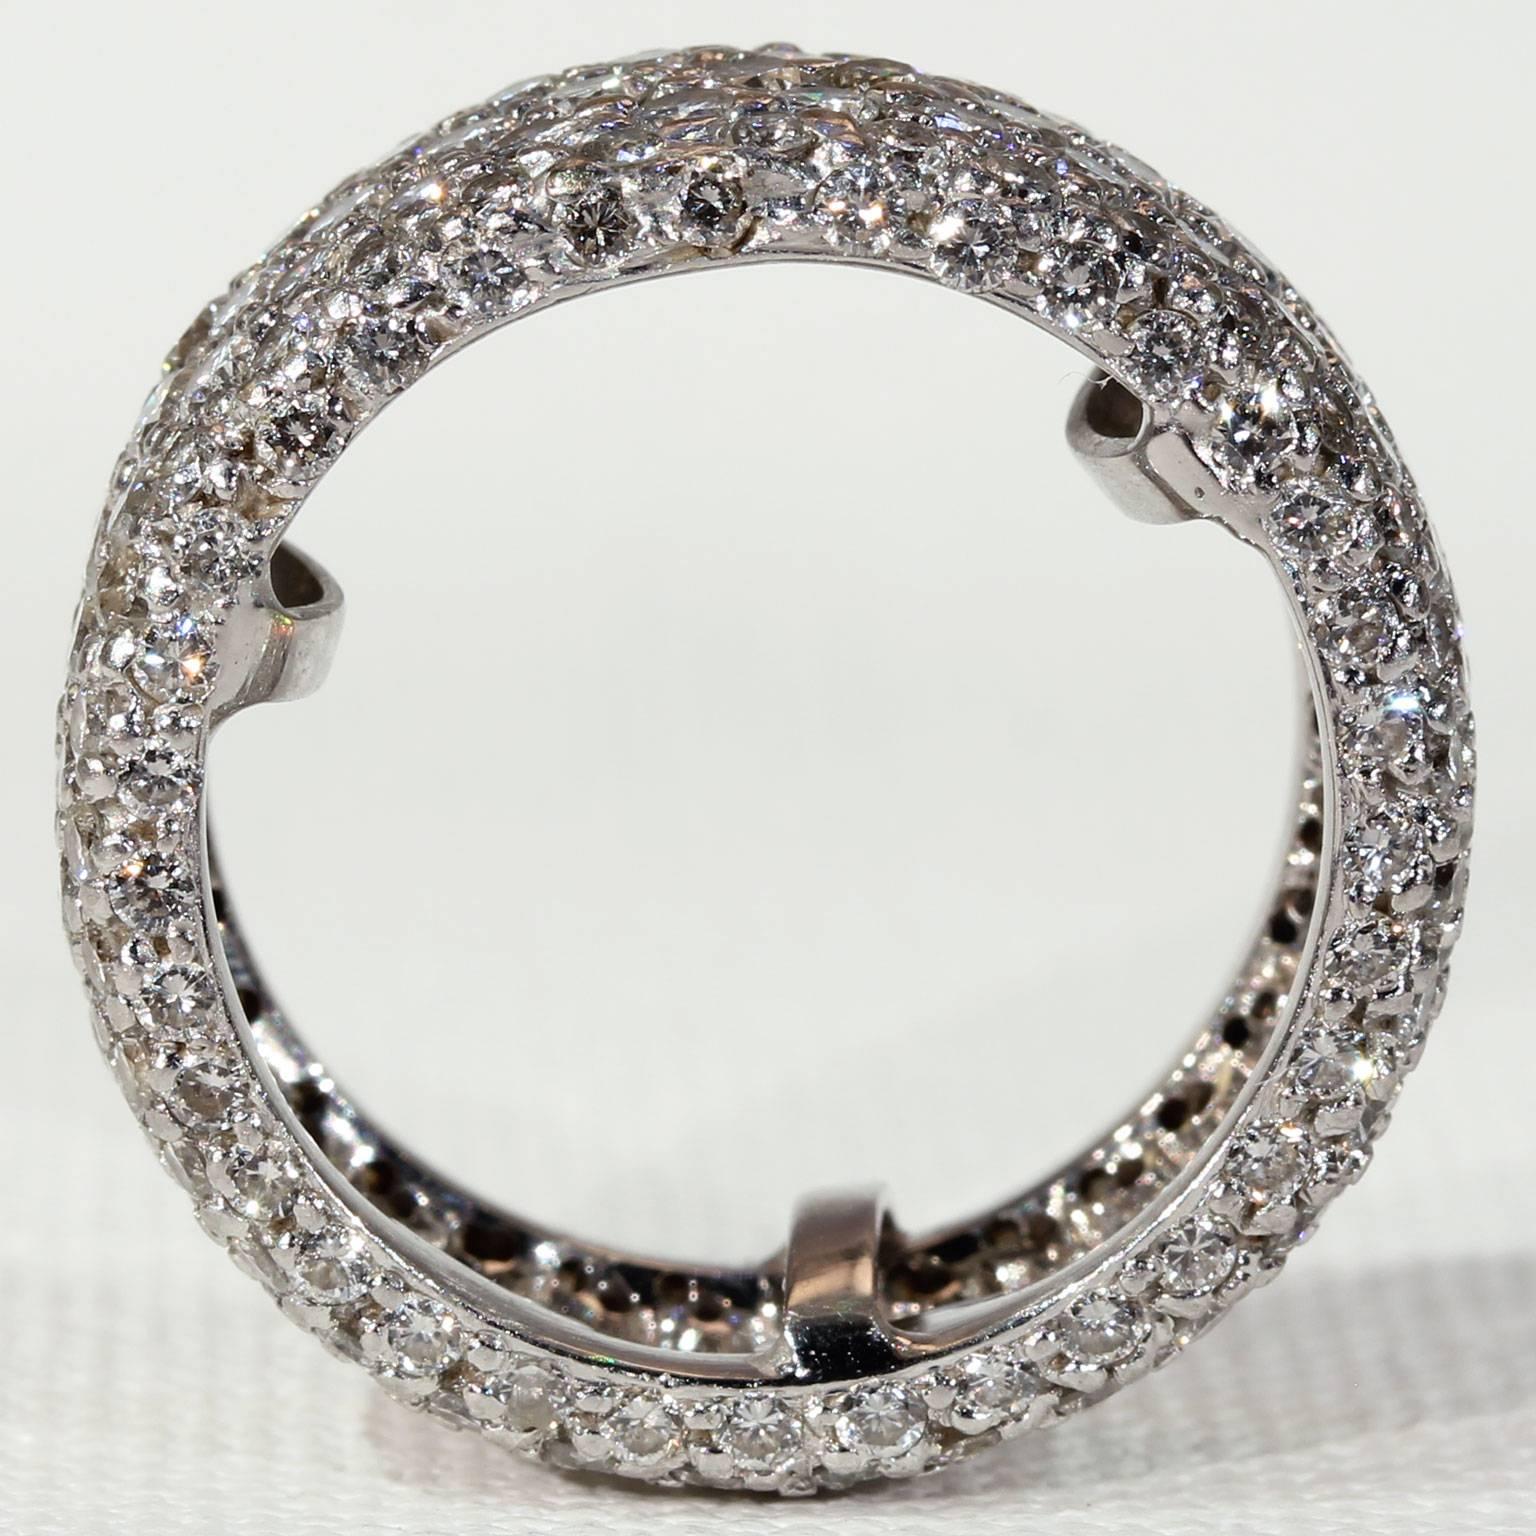 This vintage platinum diamond eternity band features seven rows of brilliant cut diamonds, for a total of 231 round sparkling stones. Altogether the diamonds weigh approximately 4.3 carats. This ring fits like a size 7.5 and has three sizers inside